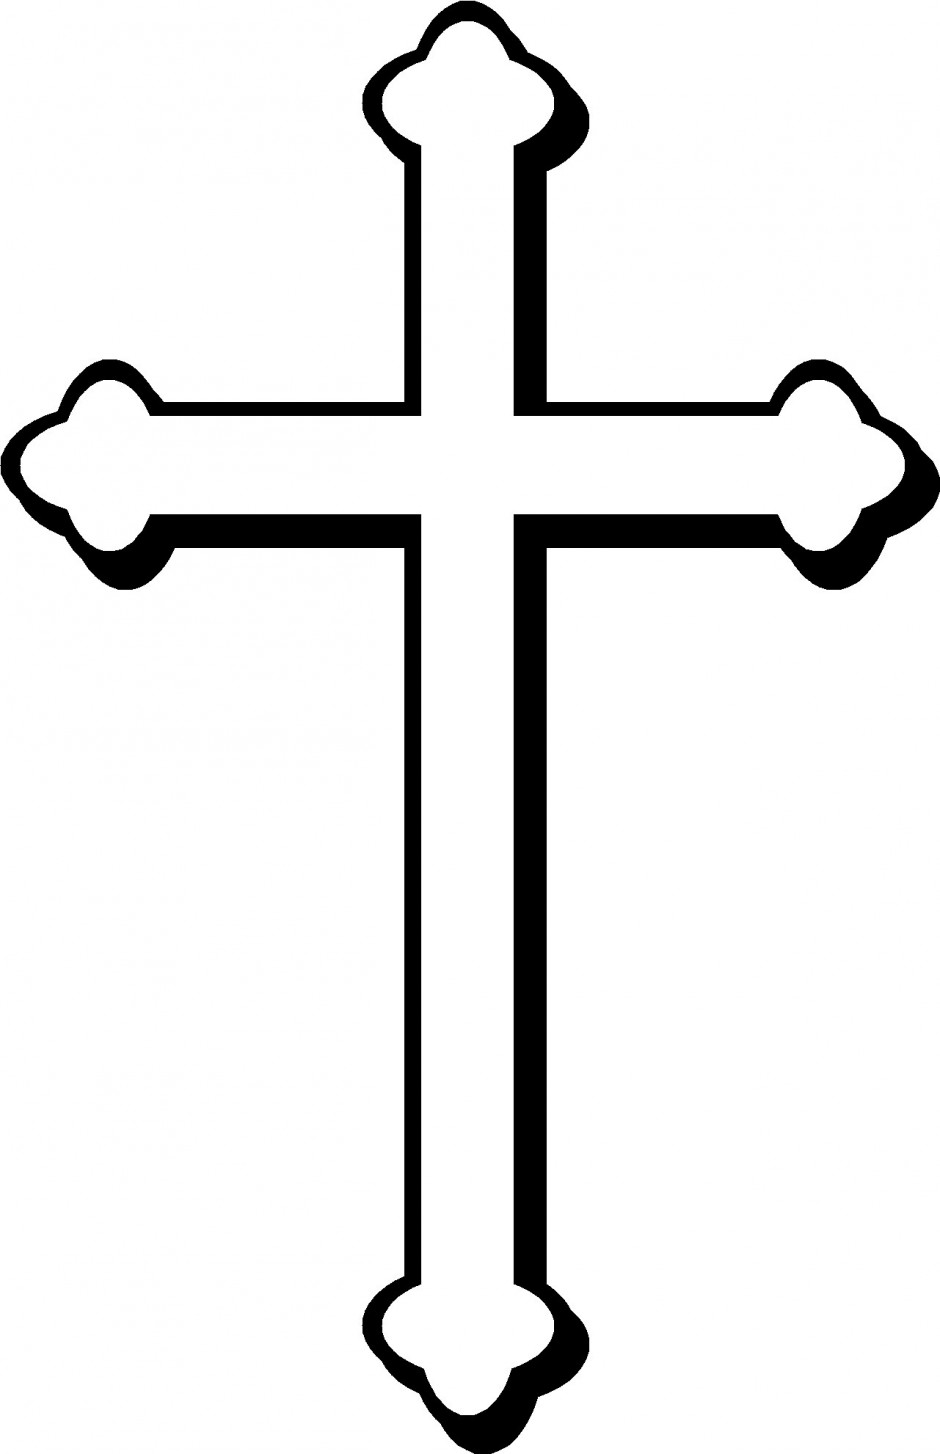 Sign of the cross clipart - ClipartFox